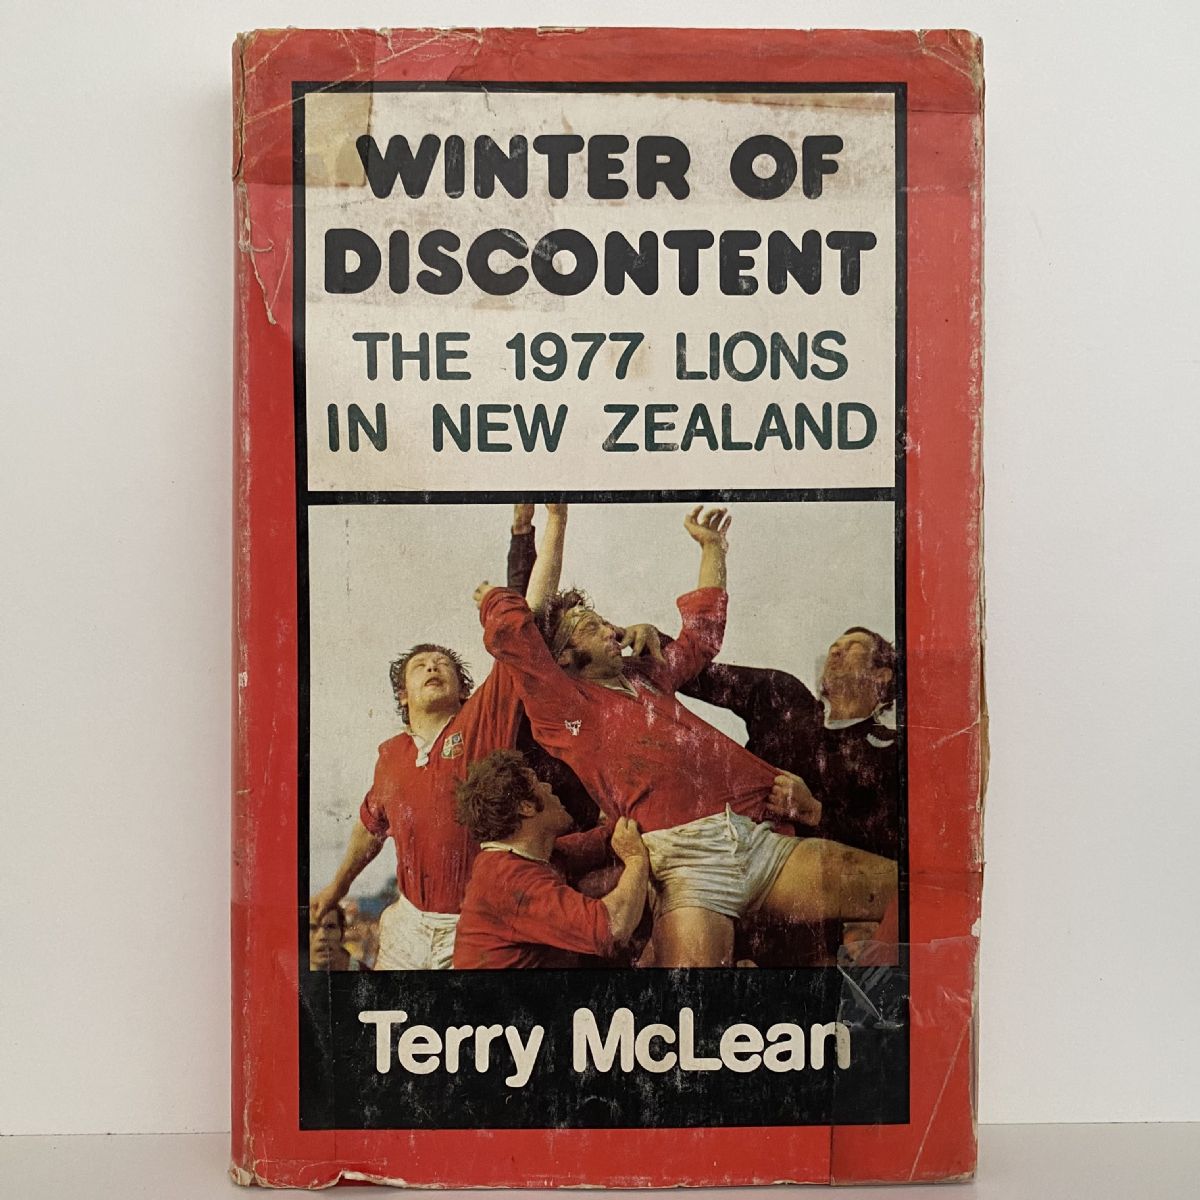 WINTER OF DISCONTENT: The 1977 Lions in New Zealand